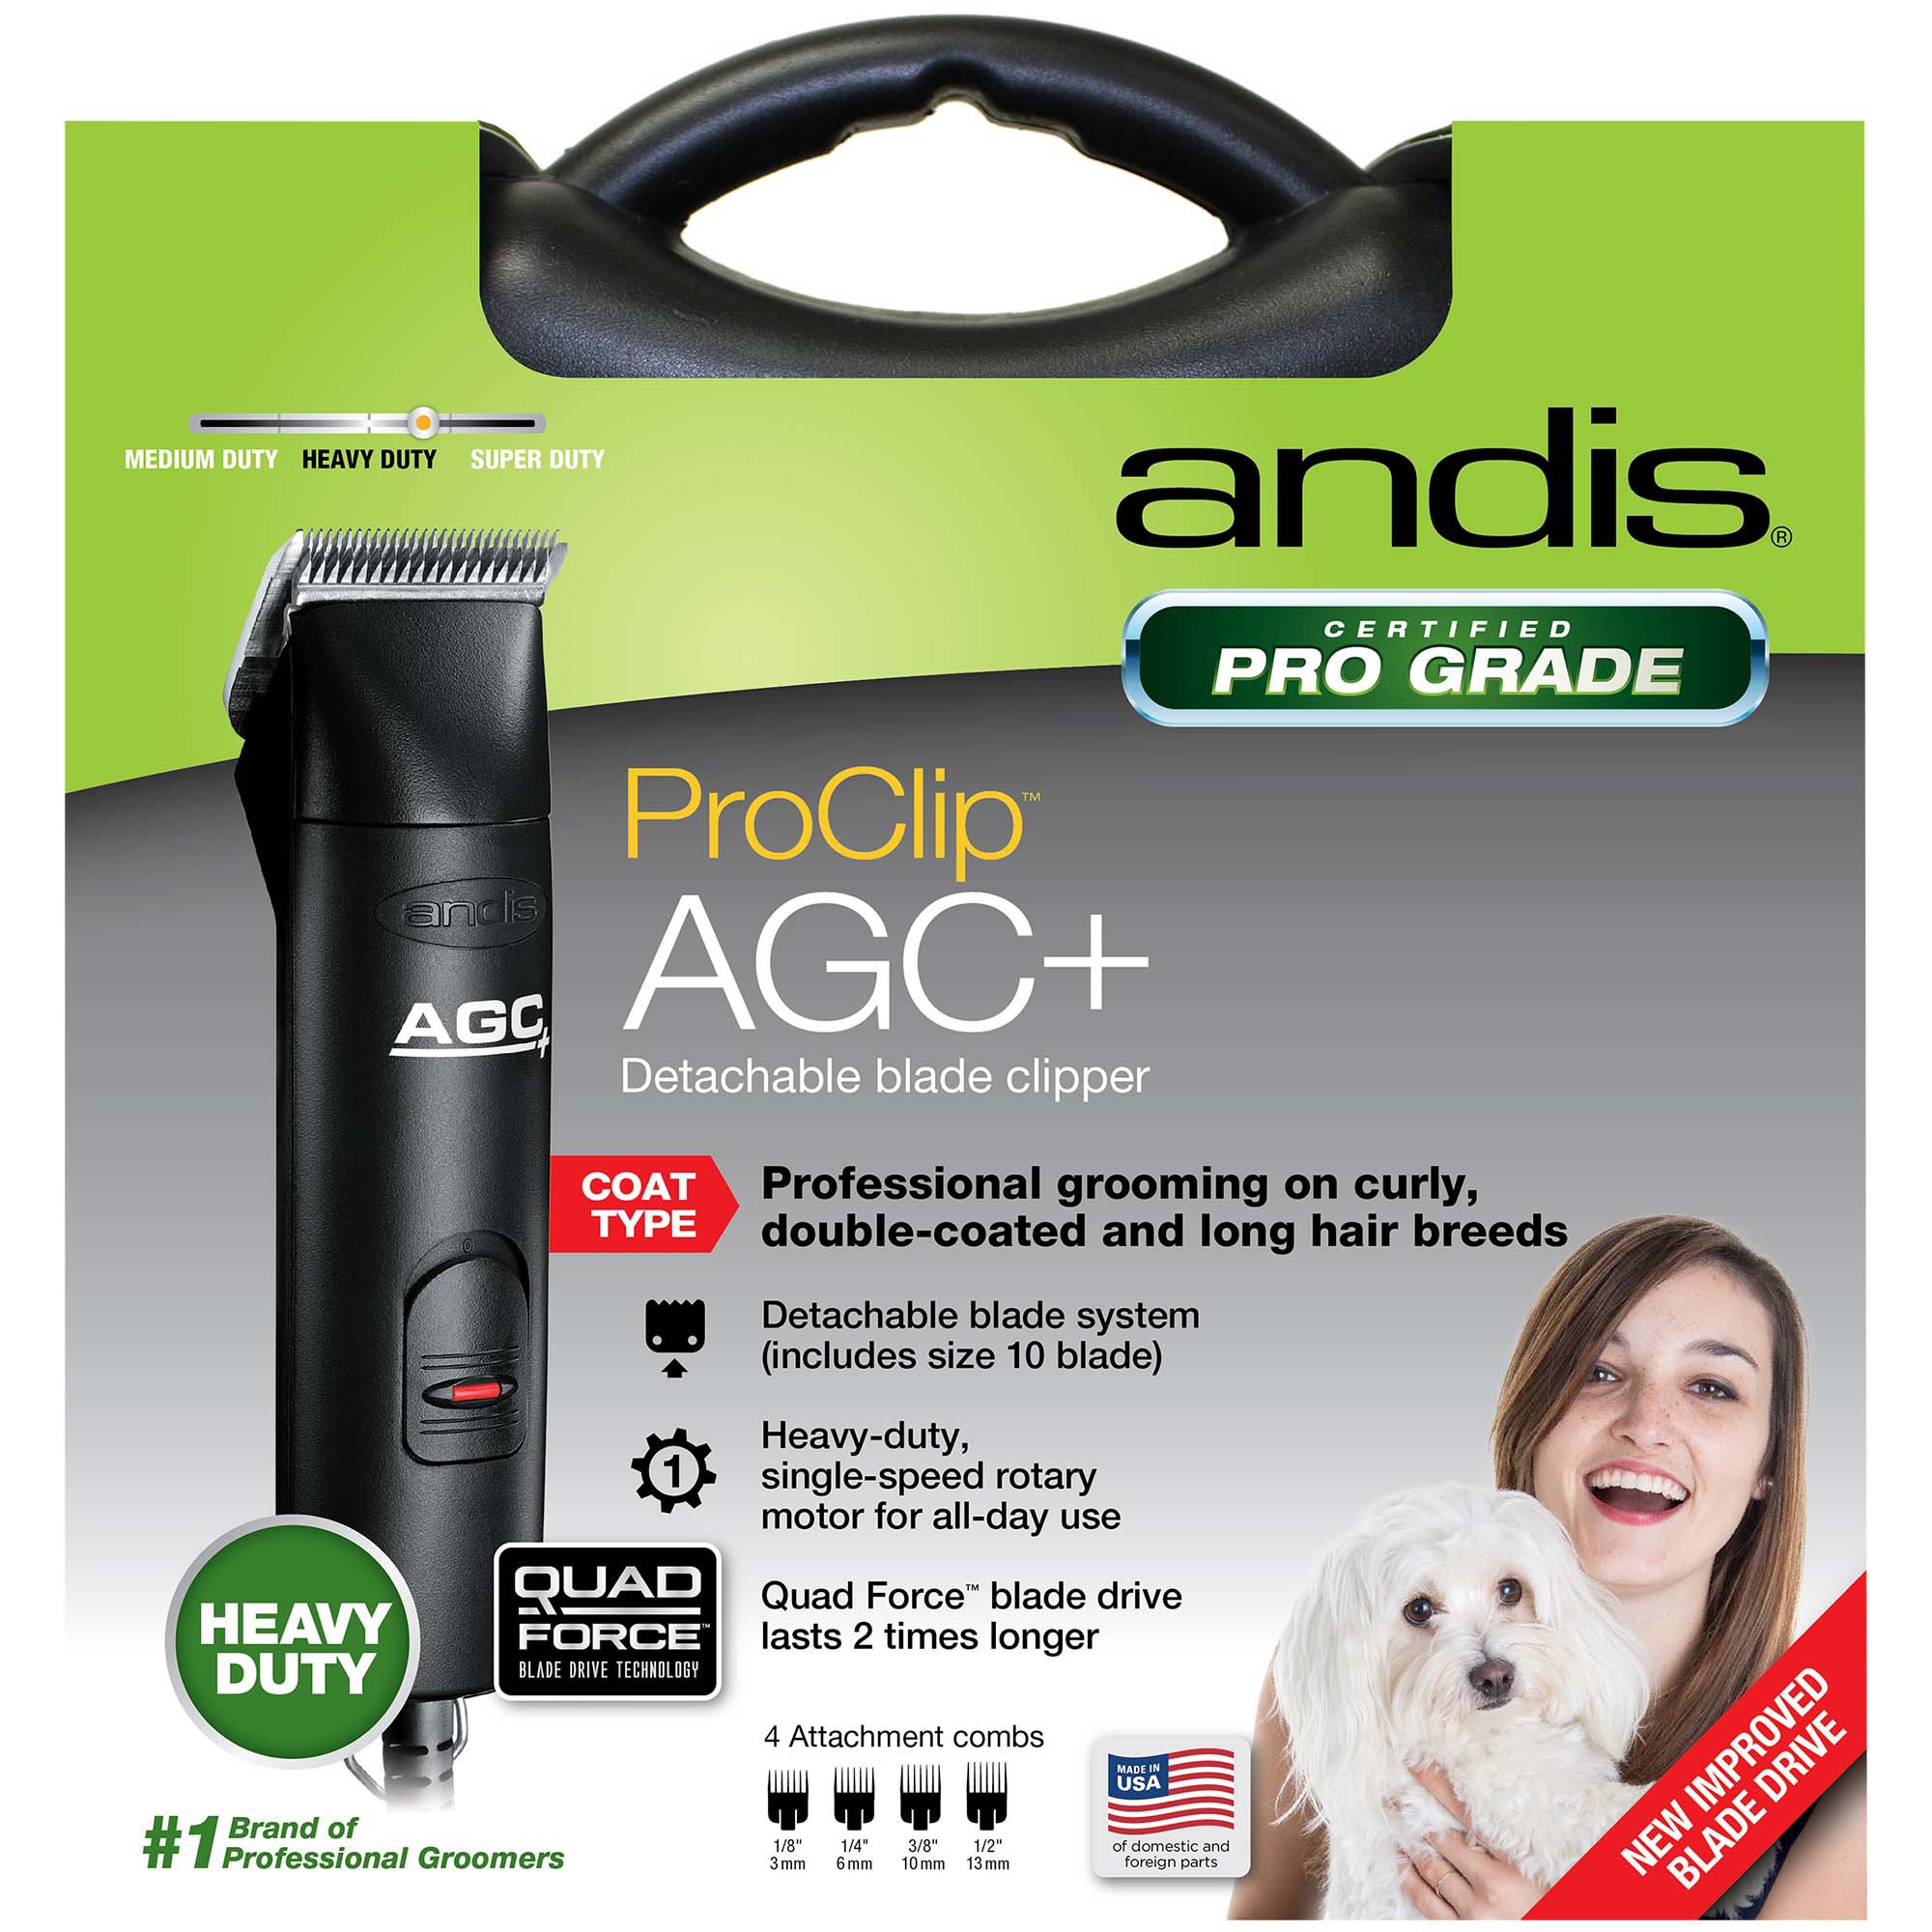 agc dog clippers